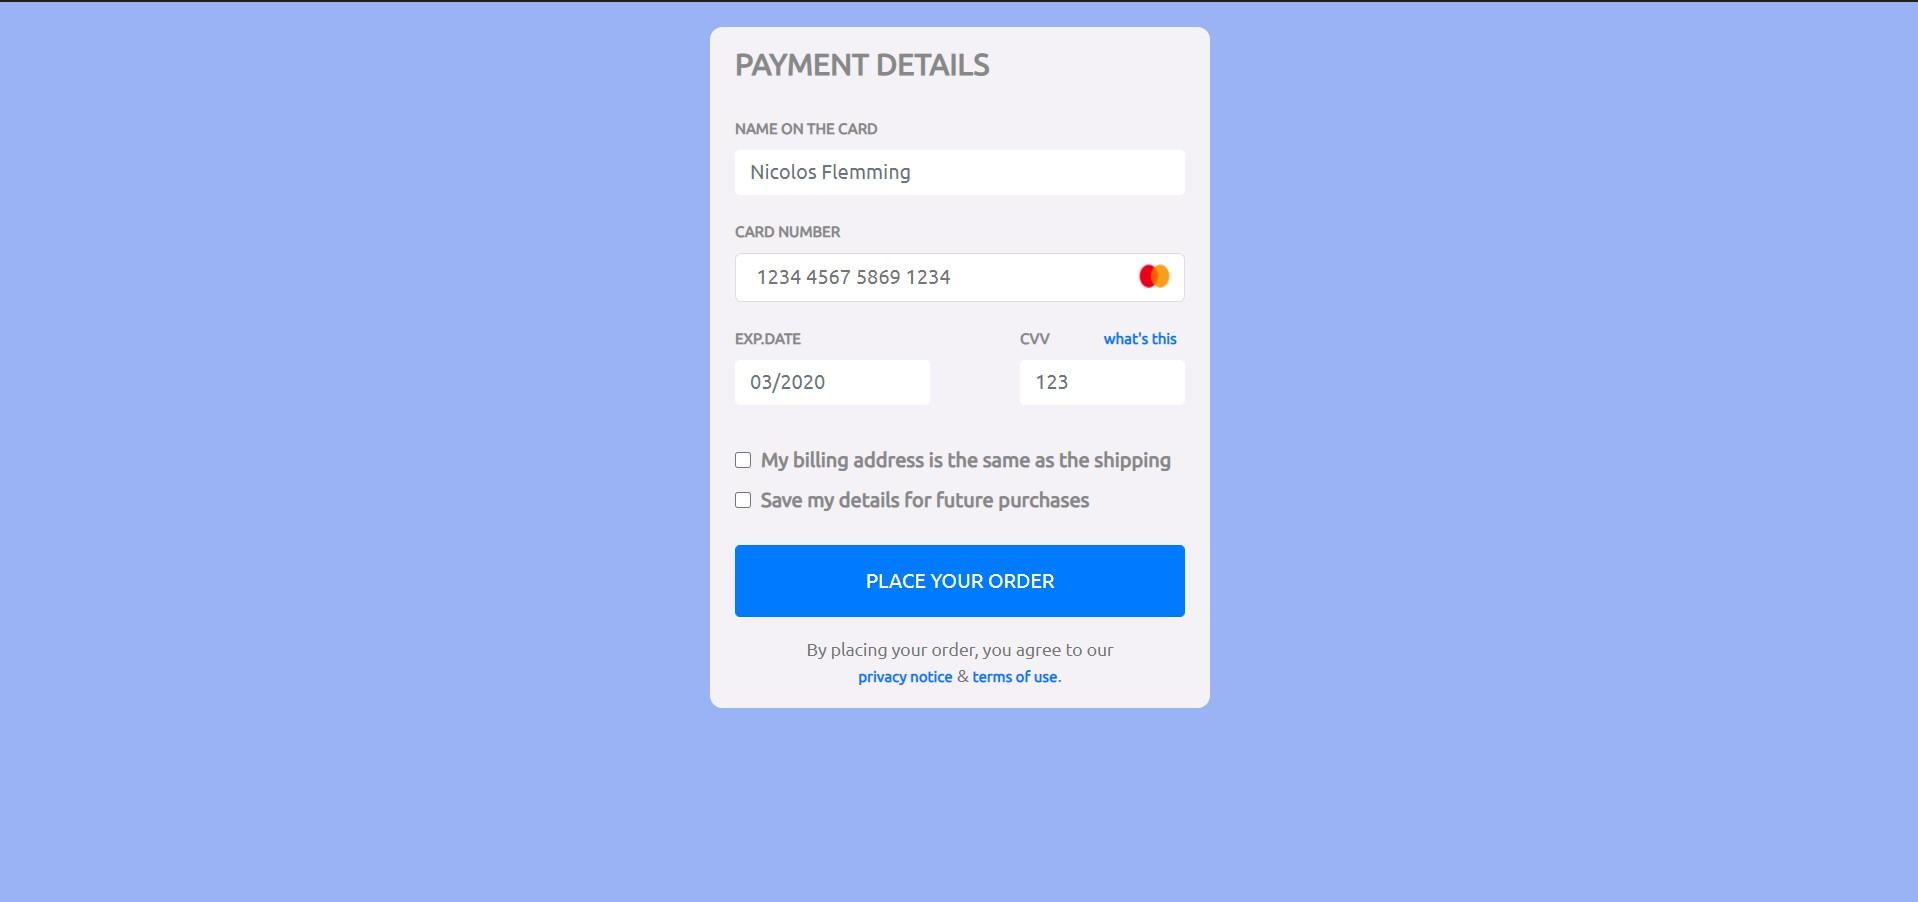 Ecommerce payment form